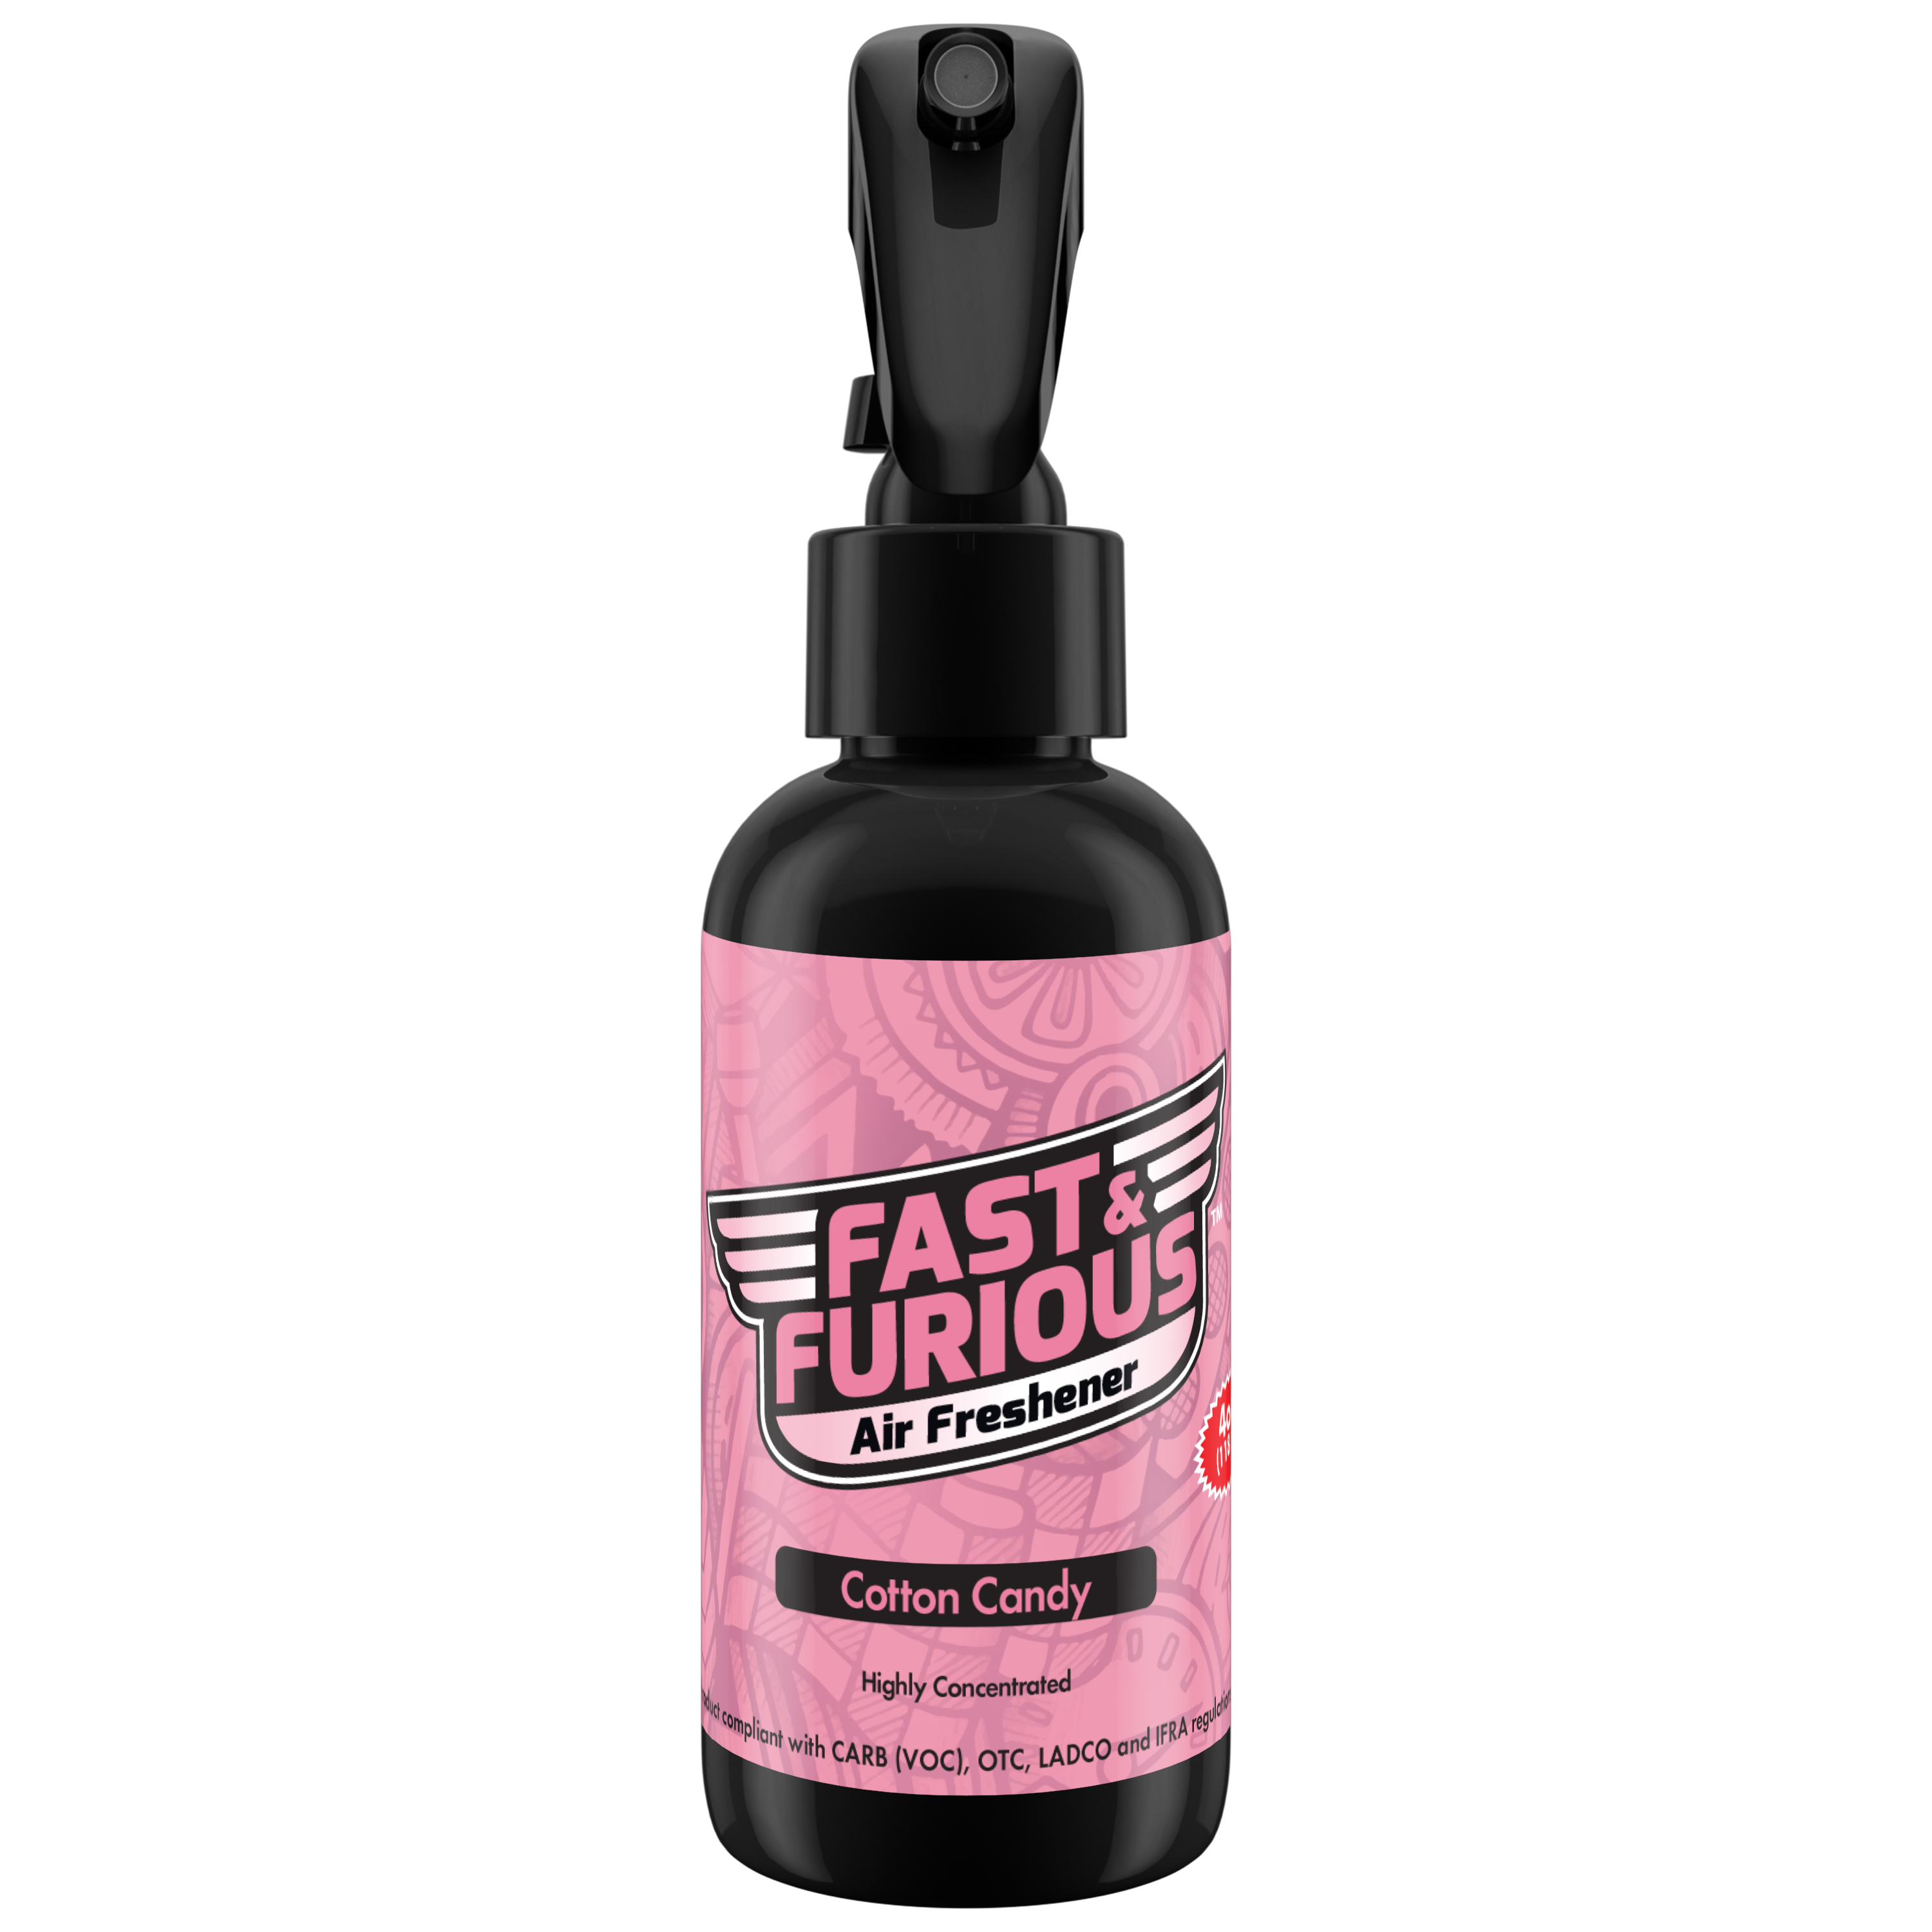 Fast and Furious Air Freshener - Cotton Candy Scent Size: 4oz